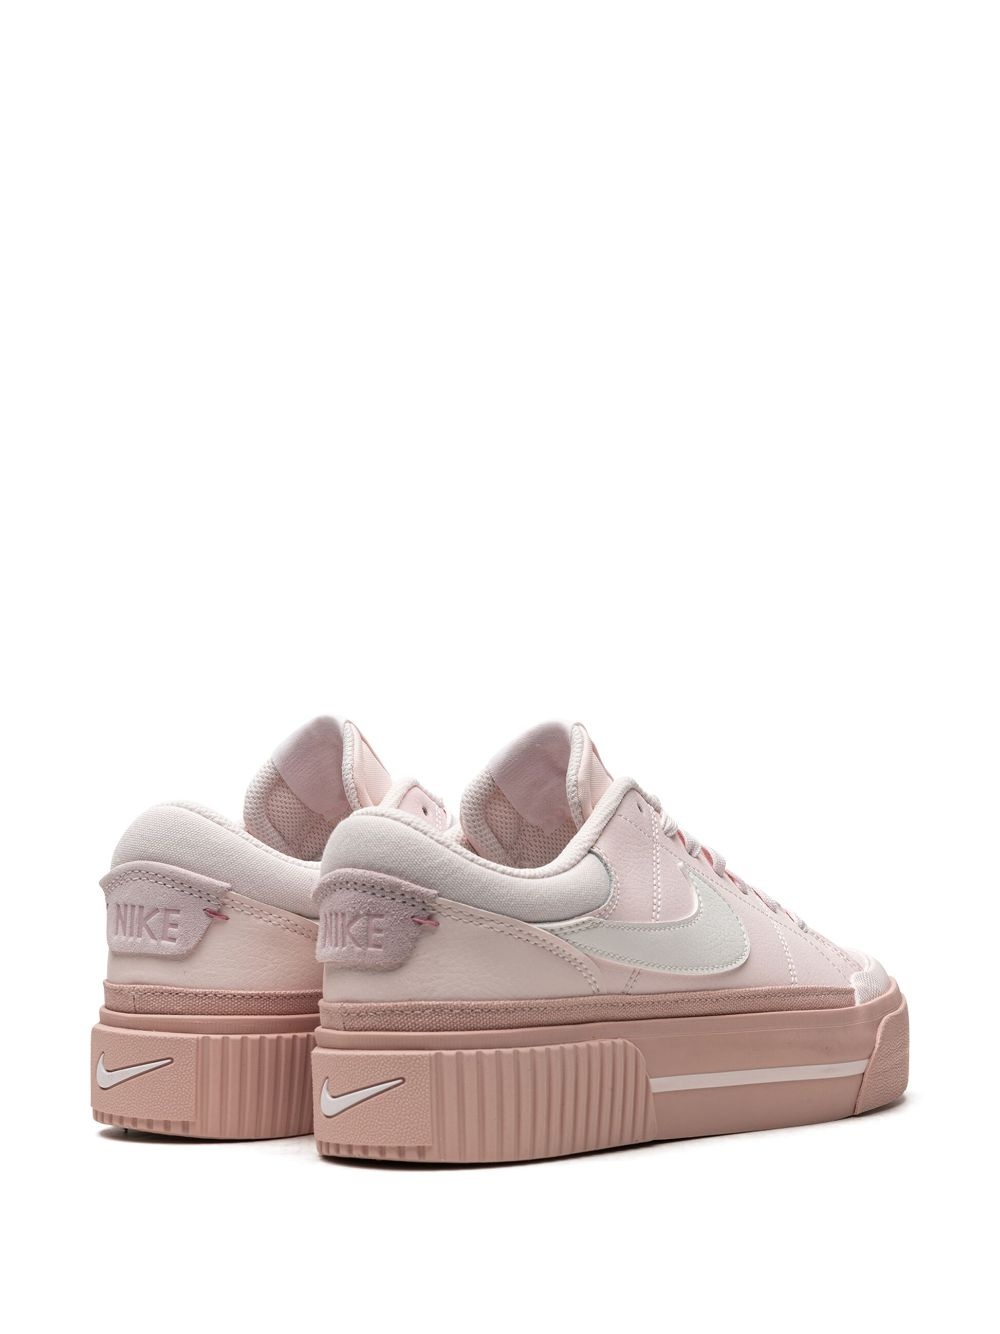 Court Legacy Lift "Light Soft Pink" sneakers - 3